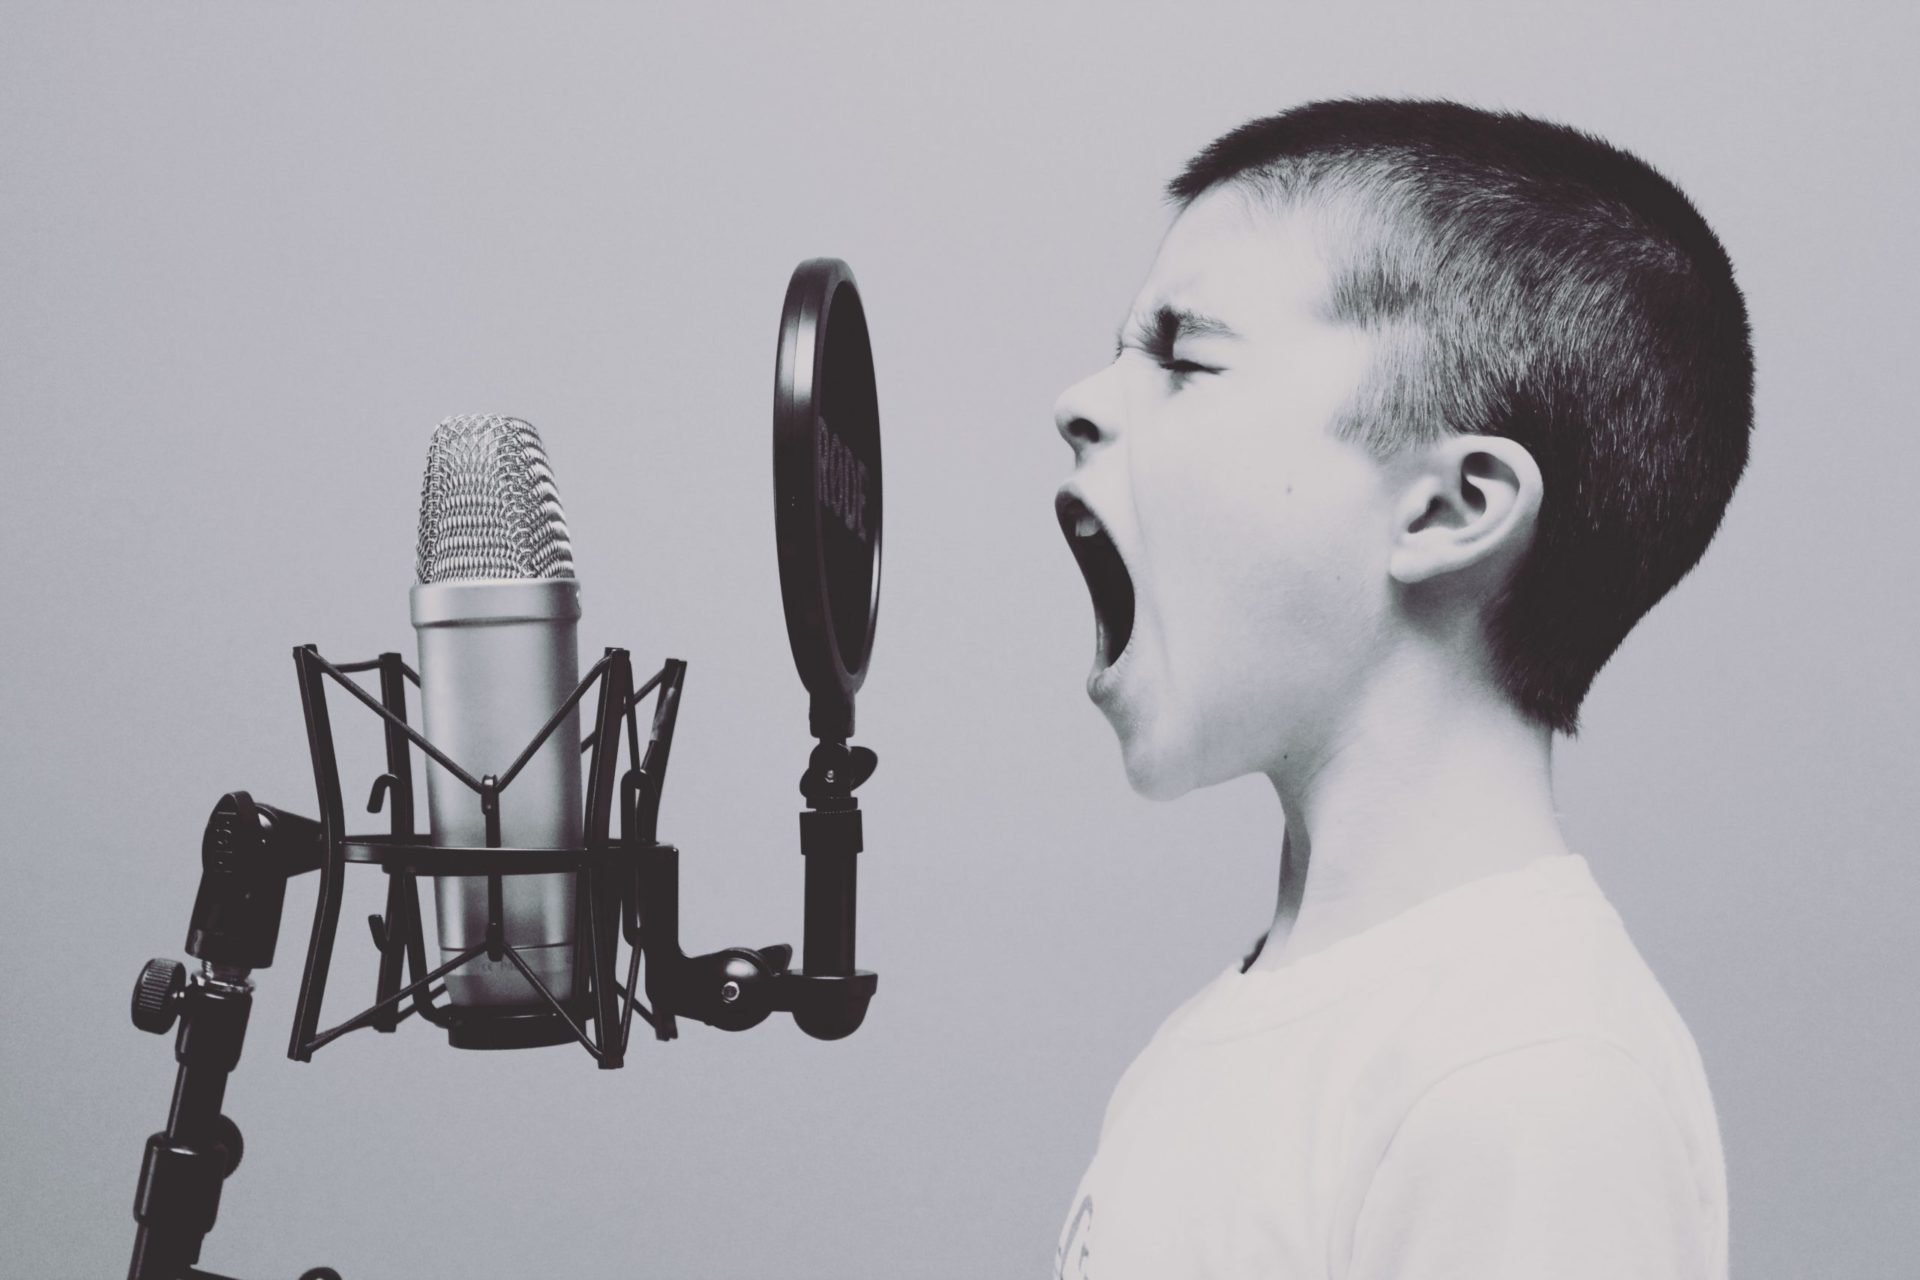 Boy singing into microphone with pop filter. (Photo by Jason Rosewell on Unsplash)